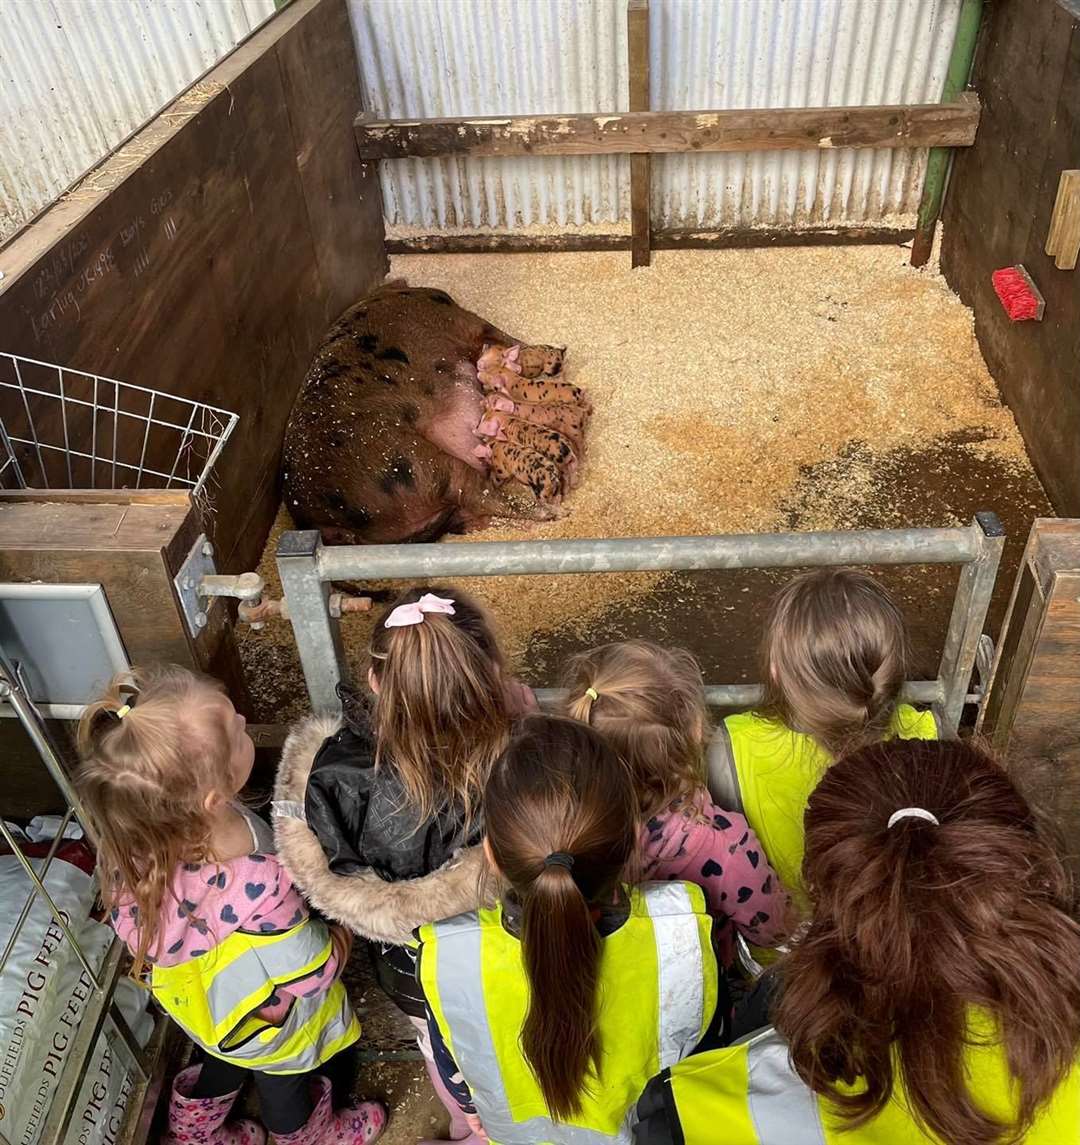 Children can see piglets at Curly's farm Bay View, Sheppey